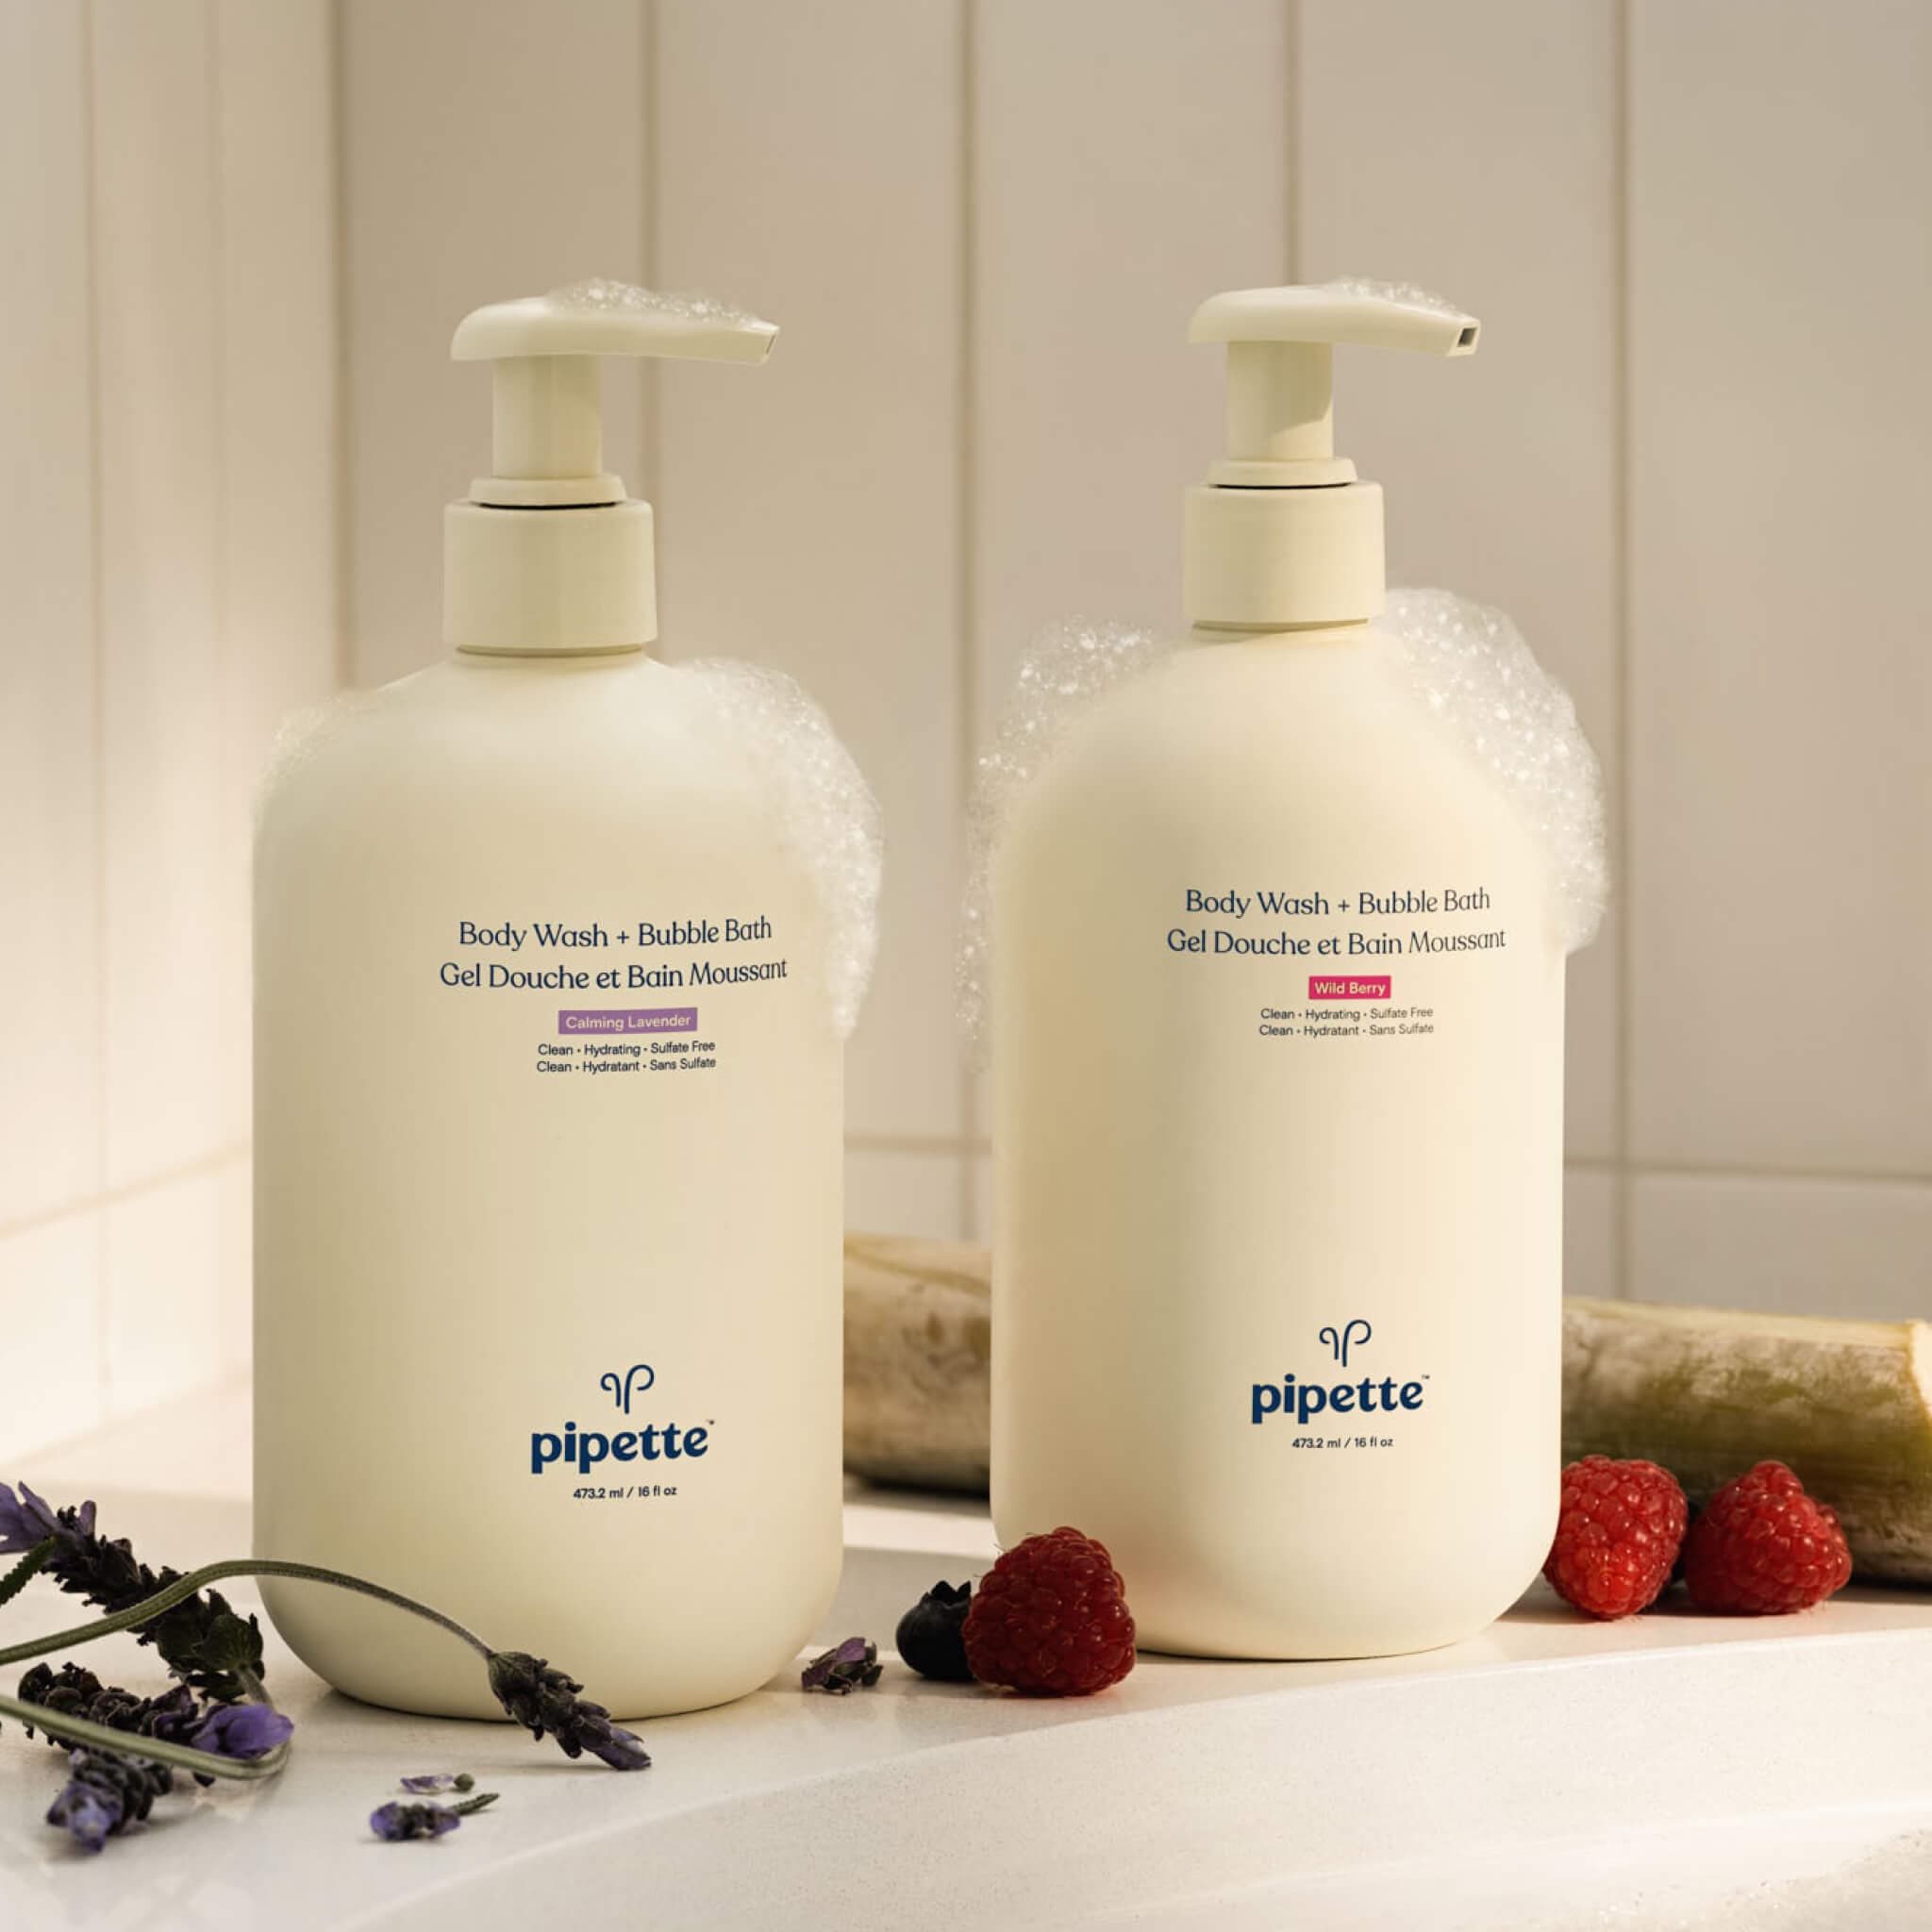 bottles of body wash and bubble bath available in two plant derived aromas, calming lavender and wild berry